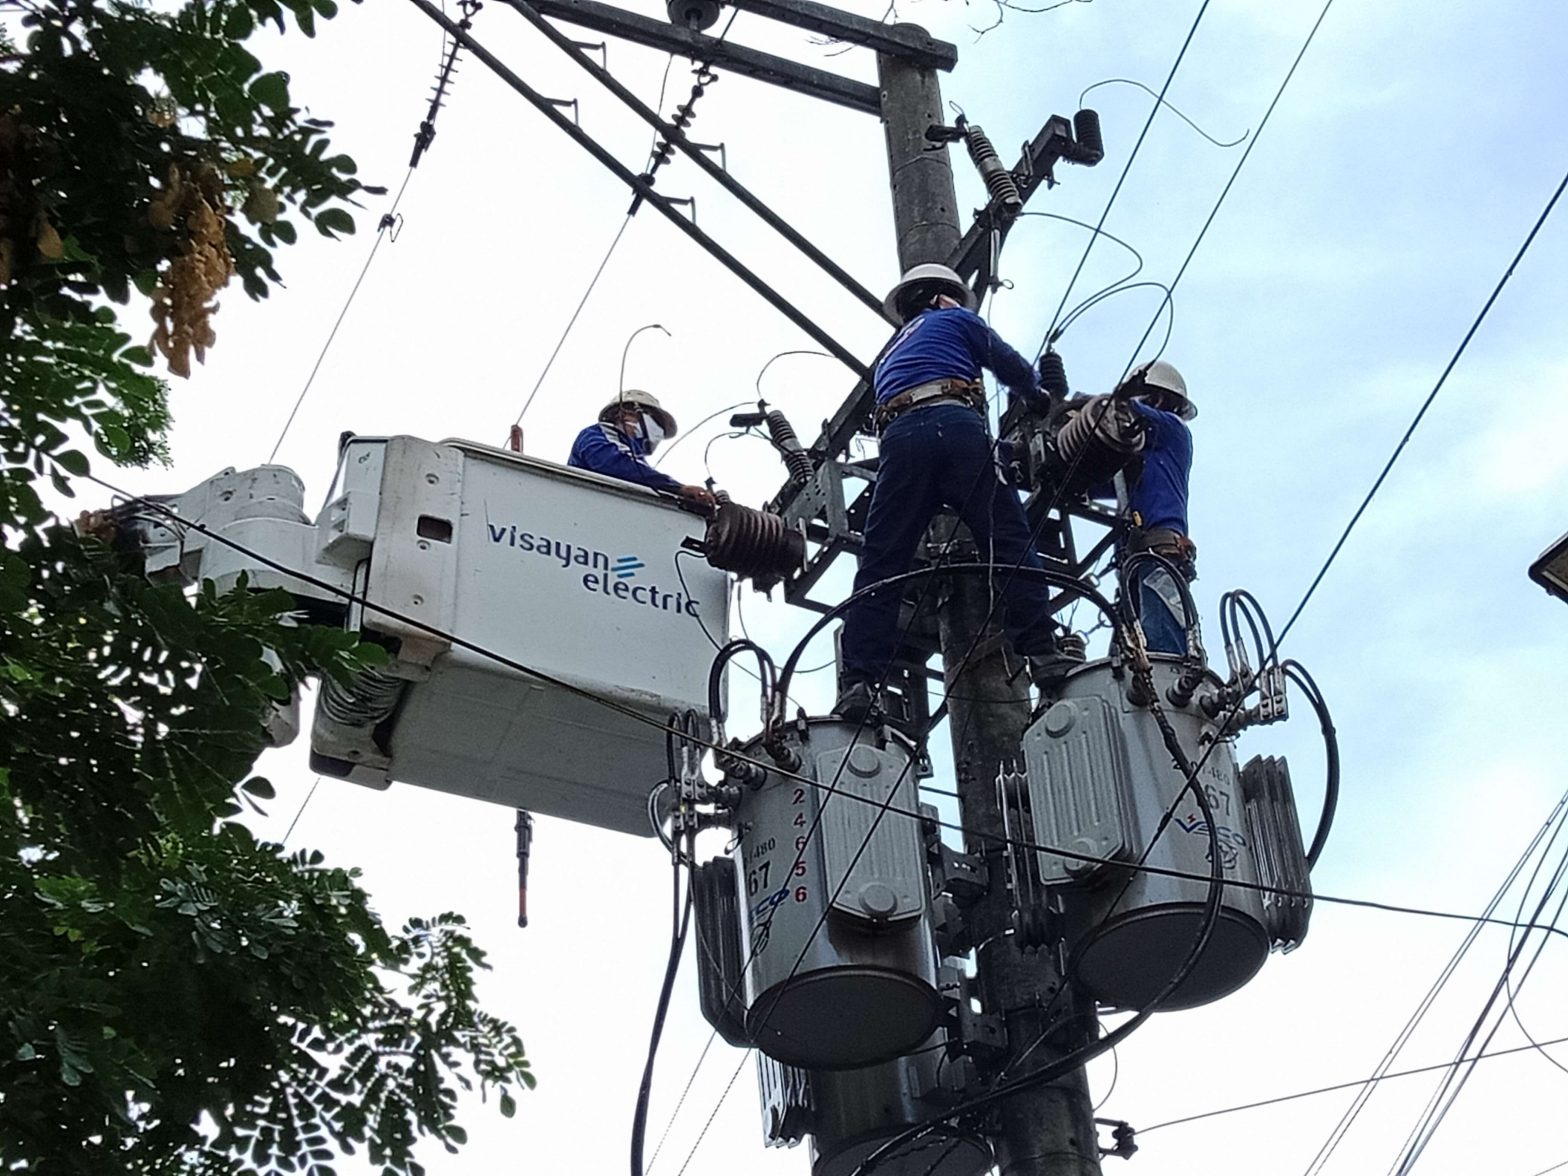 No electricity disconnection for cities of Cebu, Mandaue while under MECQ